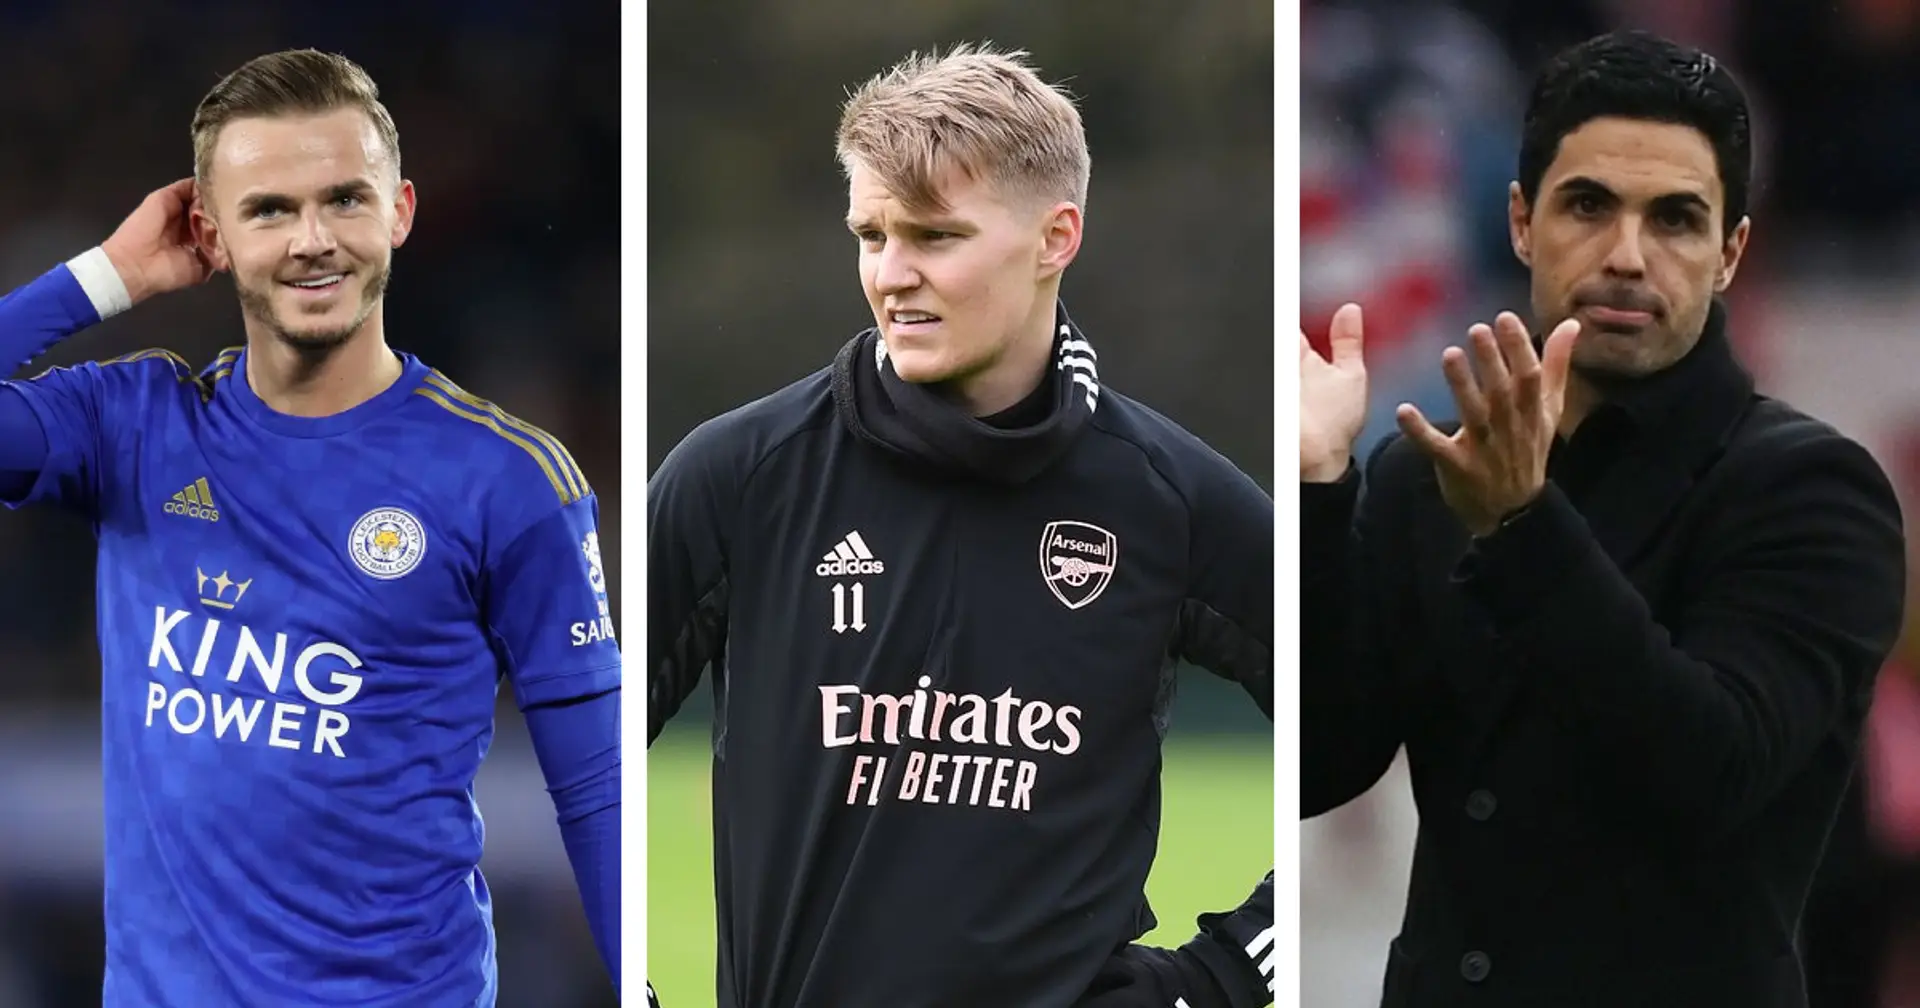 Fabrizio Romano: Arsenal 'keen' on signing Odegaard, Maddison seen as an alternative (reliability: 5 stars)